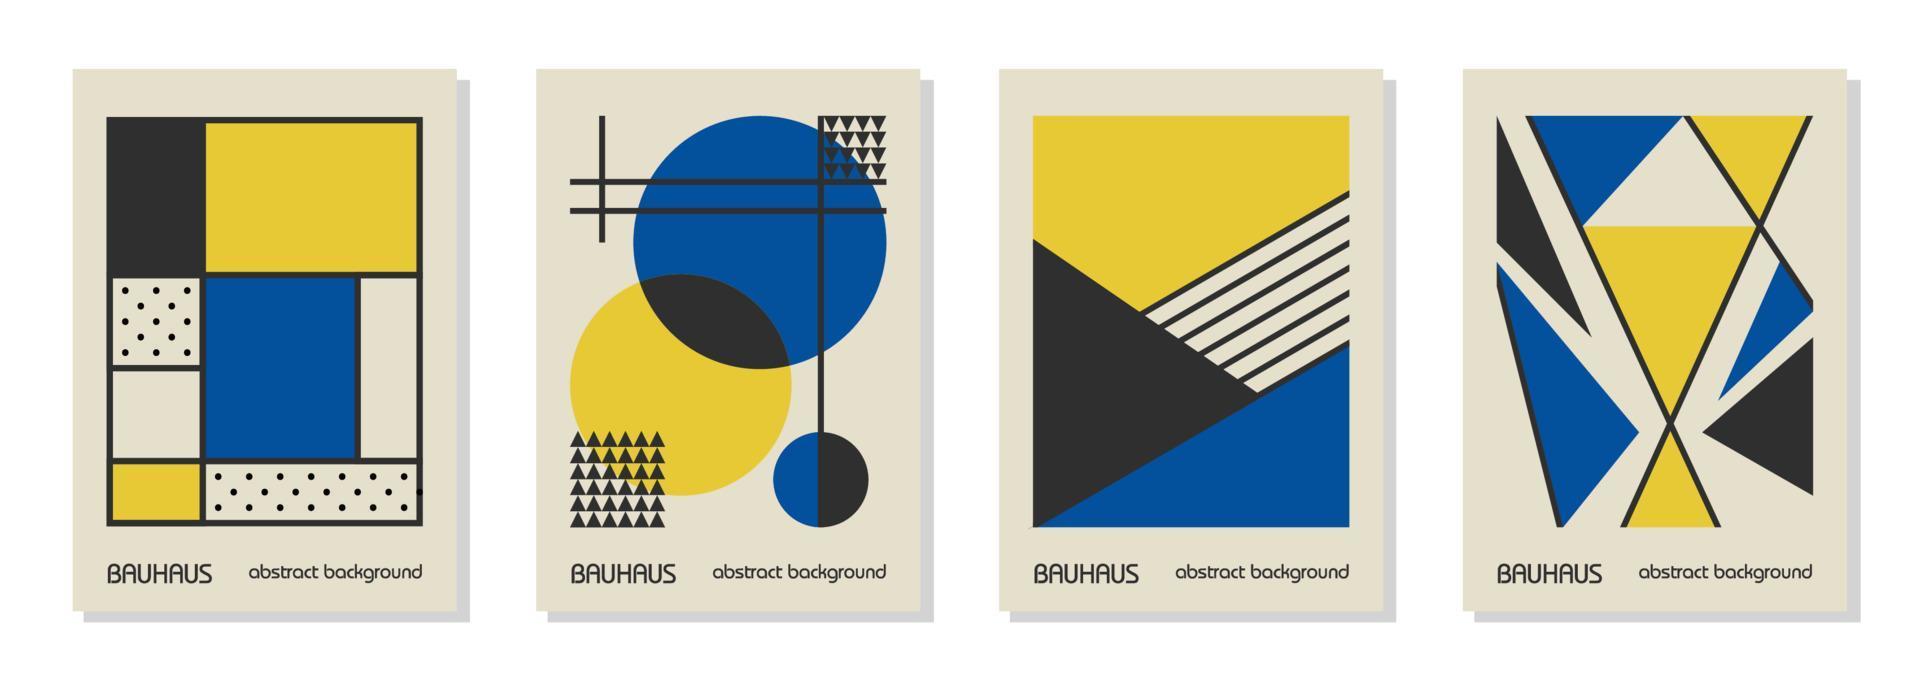 Set of 4 minimal vintage 20s geometric design posters, wall art, template, layout with primitive shapes elements. Bauhaus retro pattern vector background, blue, yellow and black Ukrainian flag colors